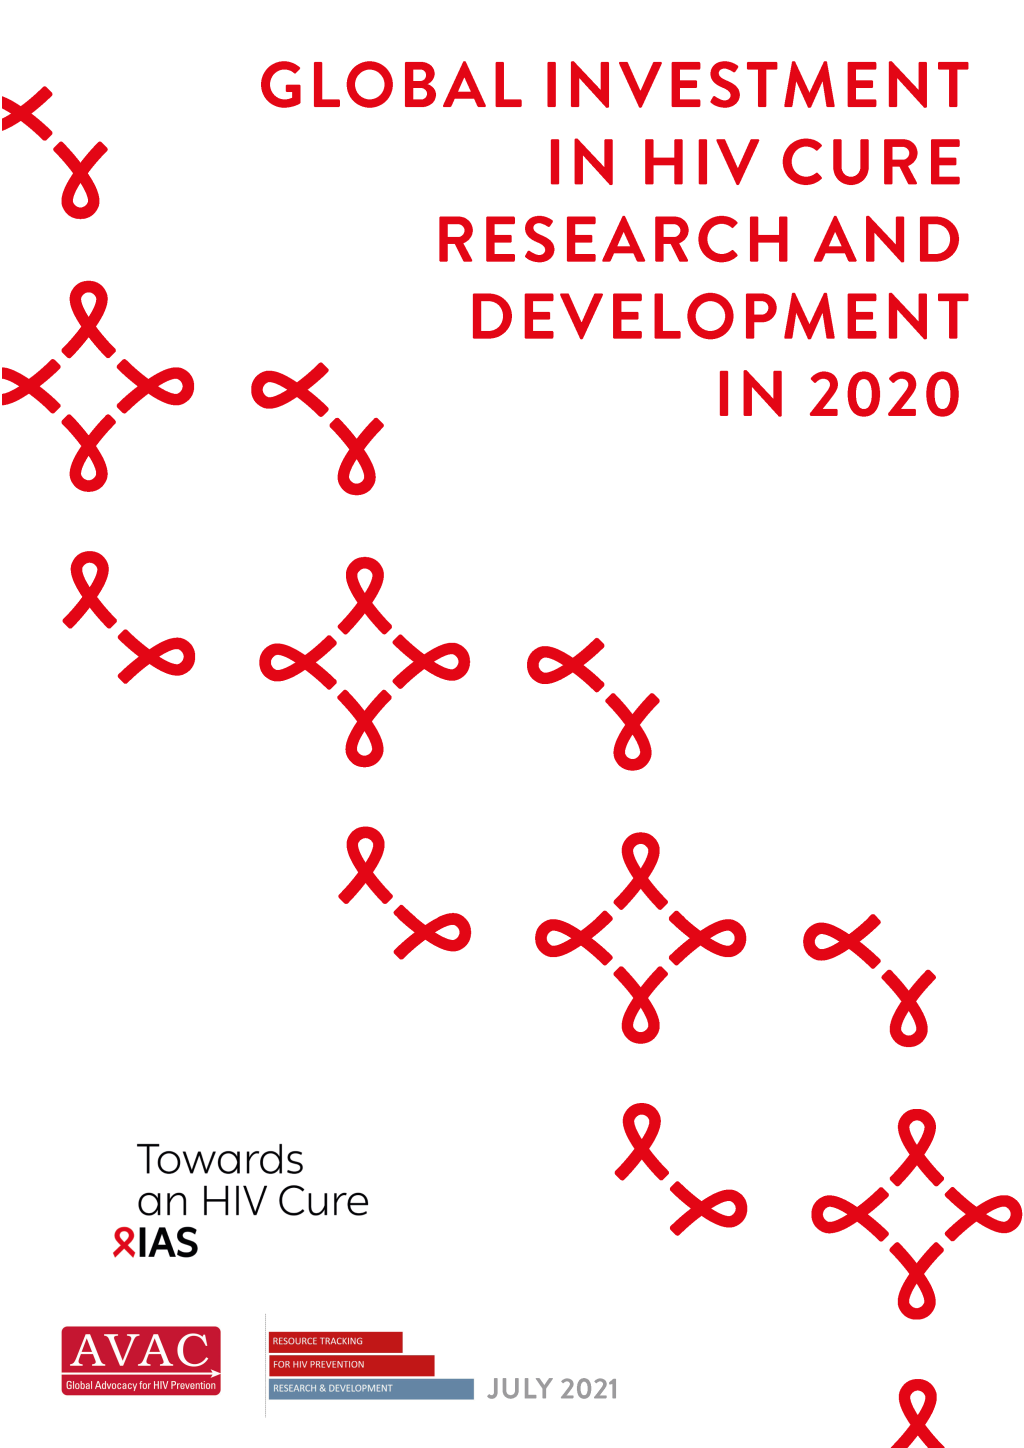 GlobalInvestmentHIVCureResearchandDevelopment2020png